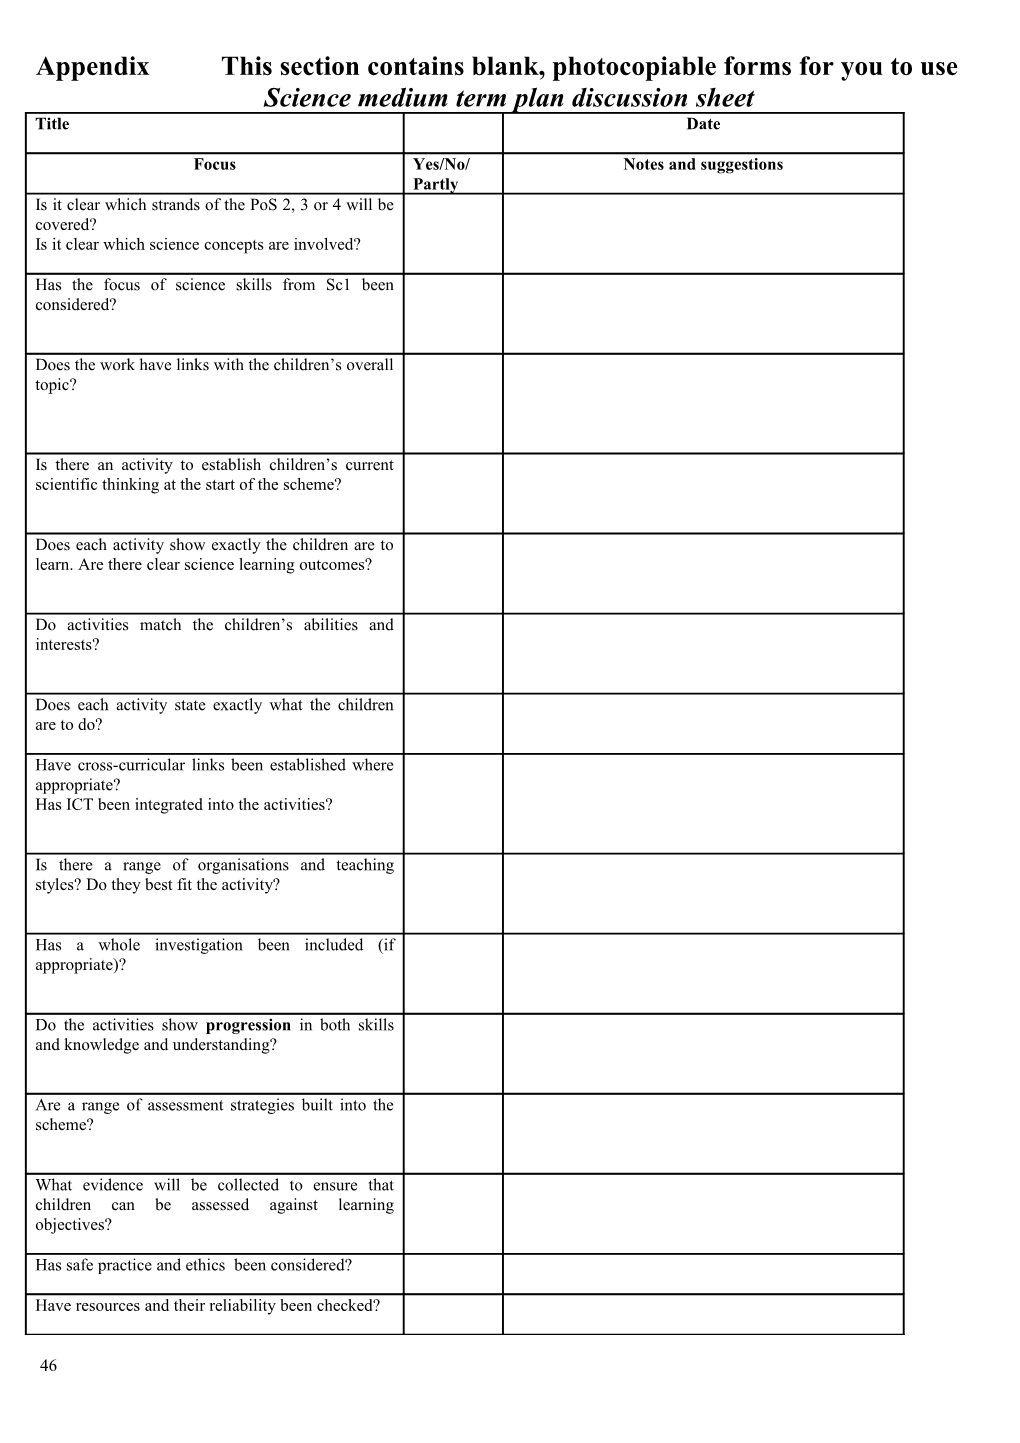 Science Scheme of Work Discussion Sheet Used with Scheme